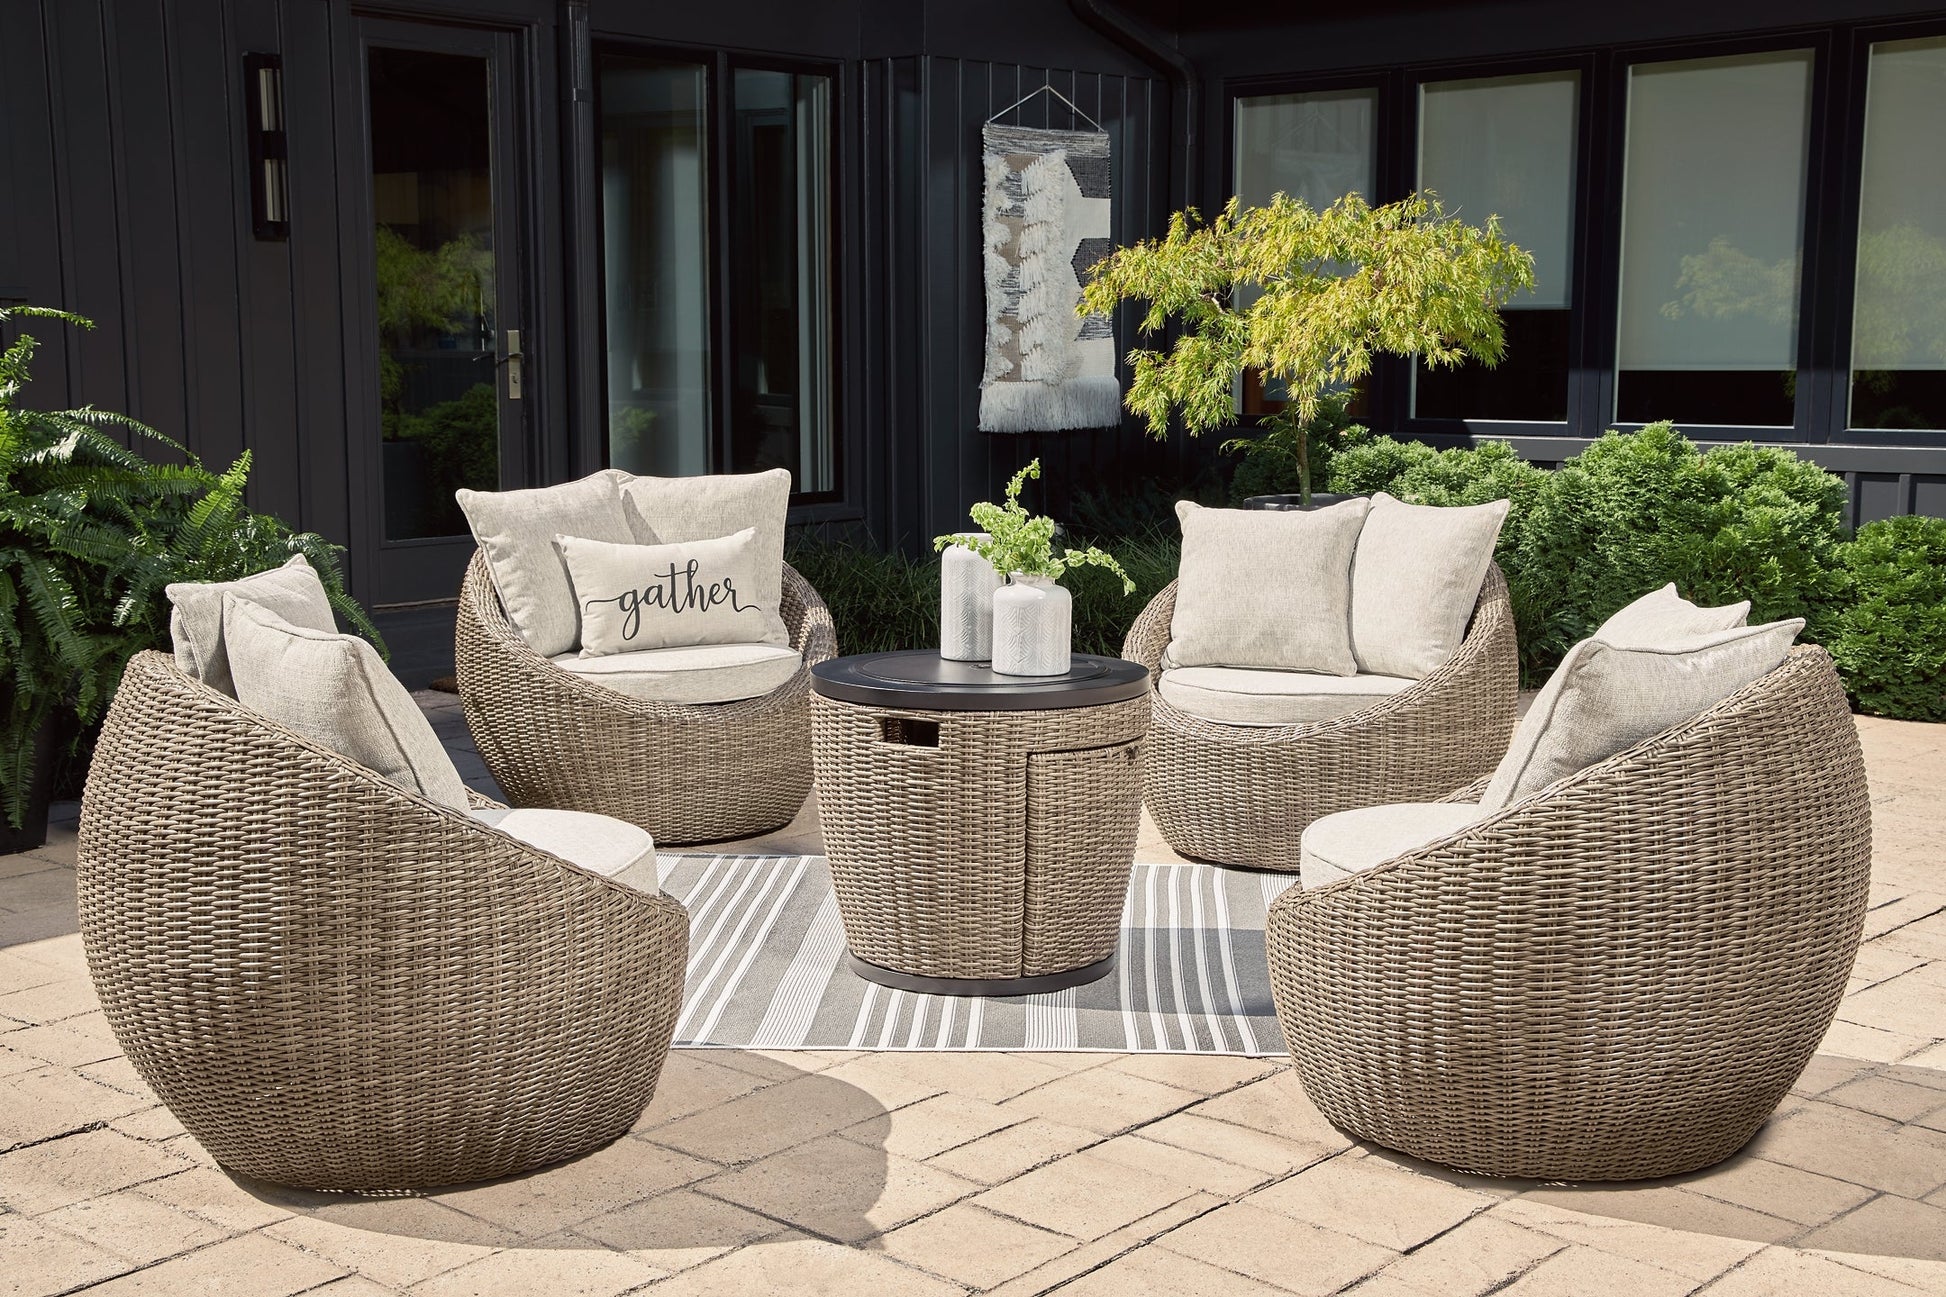 Malayah Outdoor Fire Pit Table and 4 Chairs at Cloud 9 Mattress & Furniture furniture, home furnishing, home decor